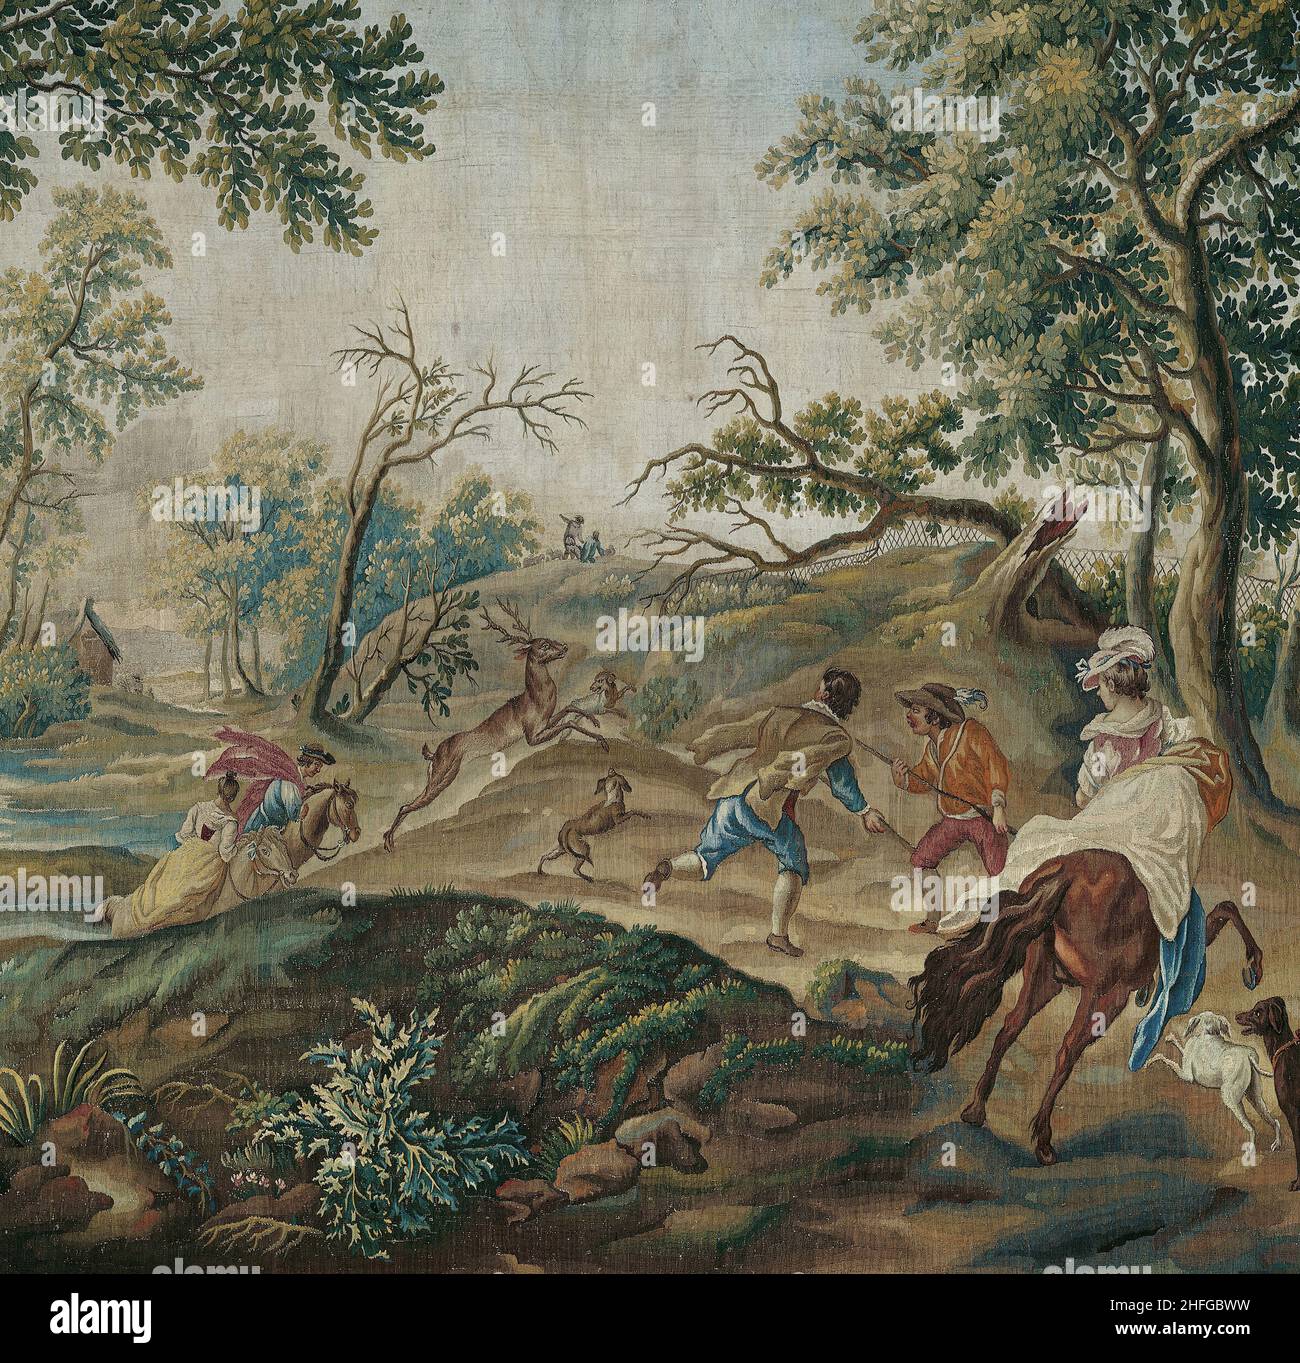 The Stag Hunt, from Pastoral Hunting Scenes, Aubusson, c. 1775. Presumably woven at the workshop of L&#xe9;onard Roby, France, after an engraving by Jacques Philippe Lebas after Philips Wouwerman. Detail from a larger artwork. Stock Photo